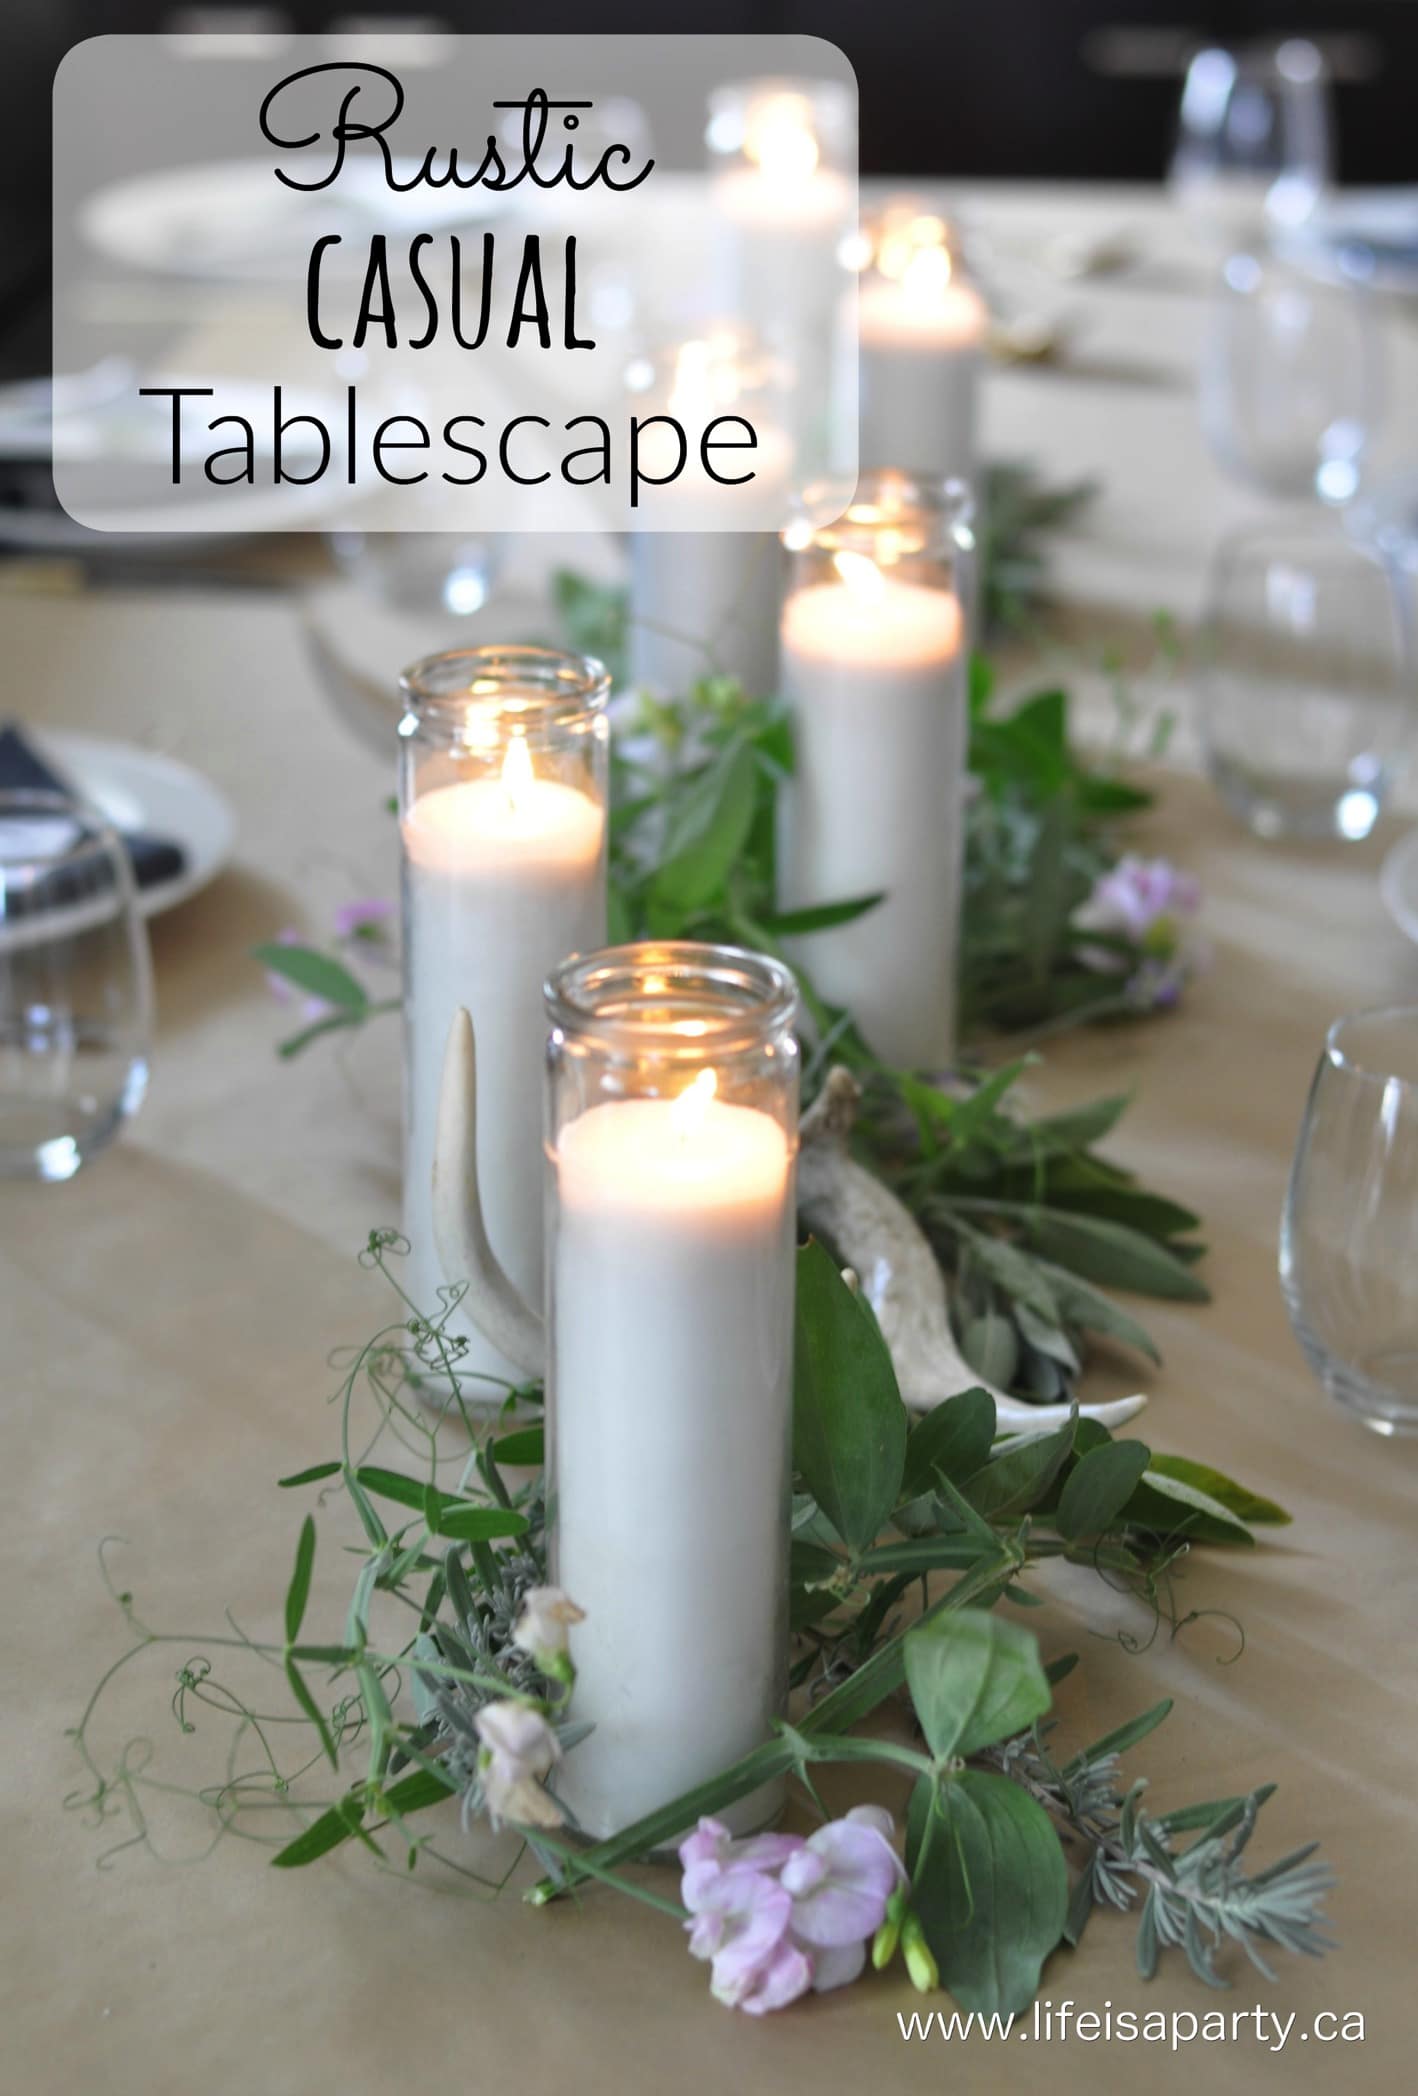 Rustic Casual Tablescape: brown kraft paper, white candles, herbs and antlers come together to make a beautiful rustic and casual table.